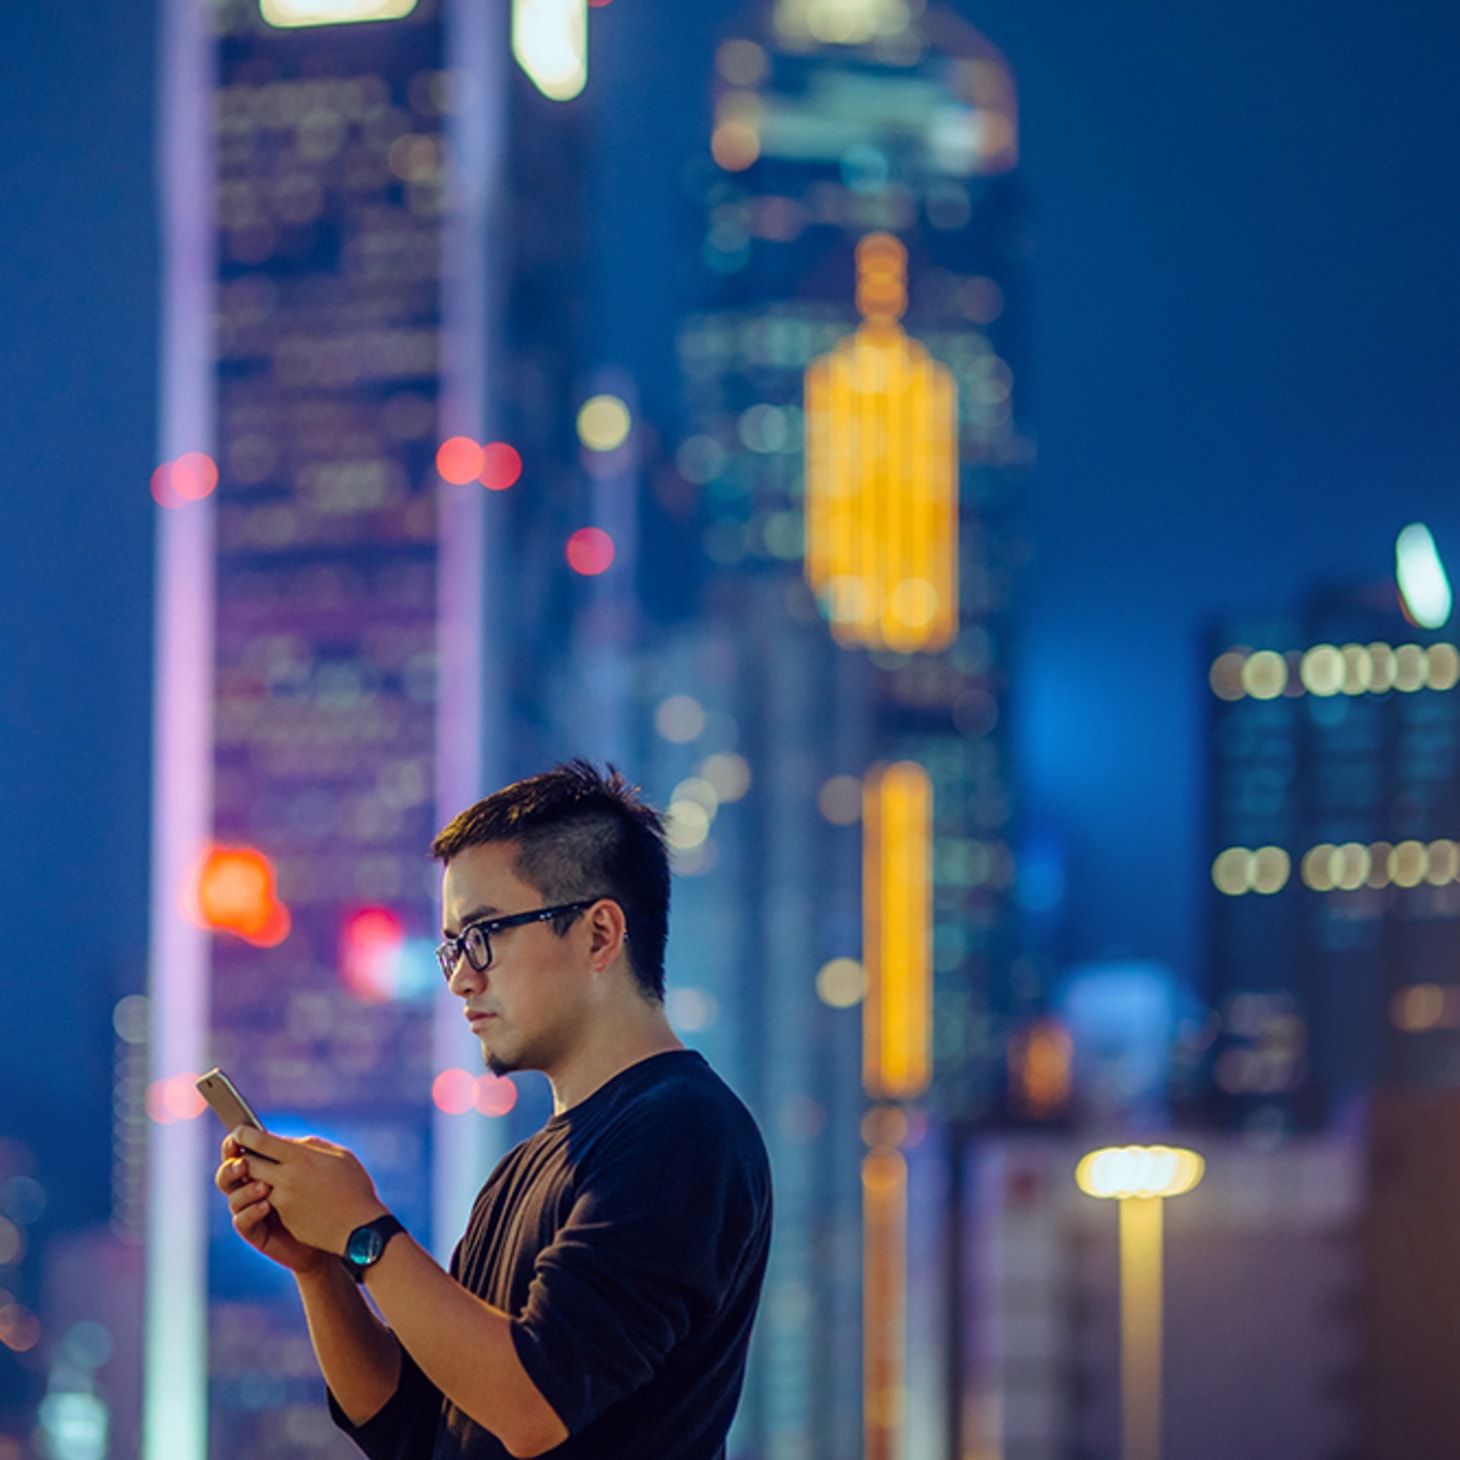 man on phone against cityscape at night